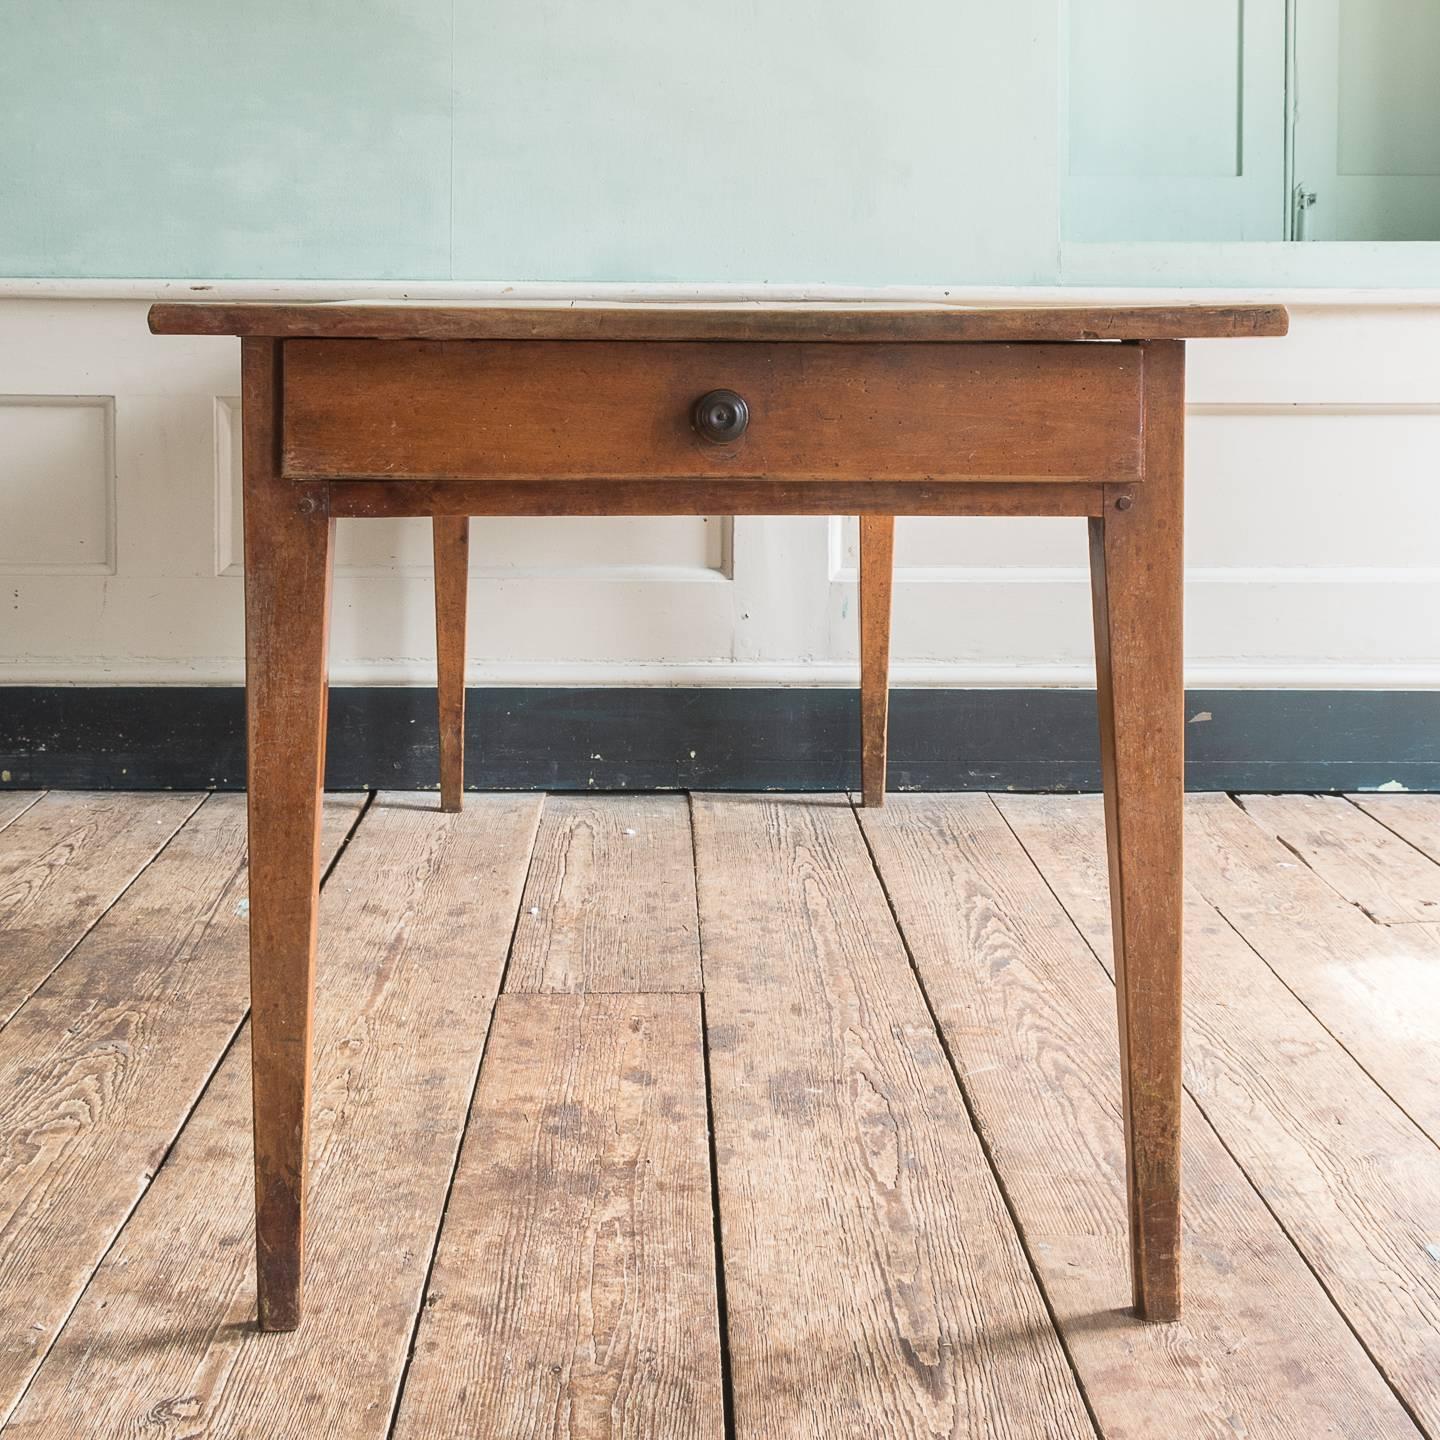 A 19th century French cherrywood farmhouse table, the cleated top above two apron drawers, on tapered legs.

This style of farmhouse table is ubiquitous in France. A classic and simple form of construction and design, often with two drawers (one at